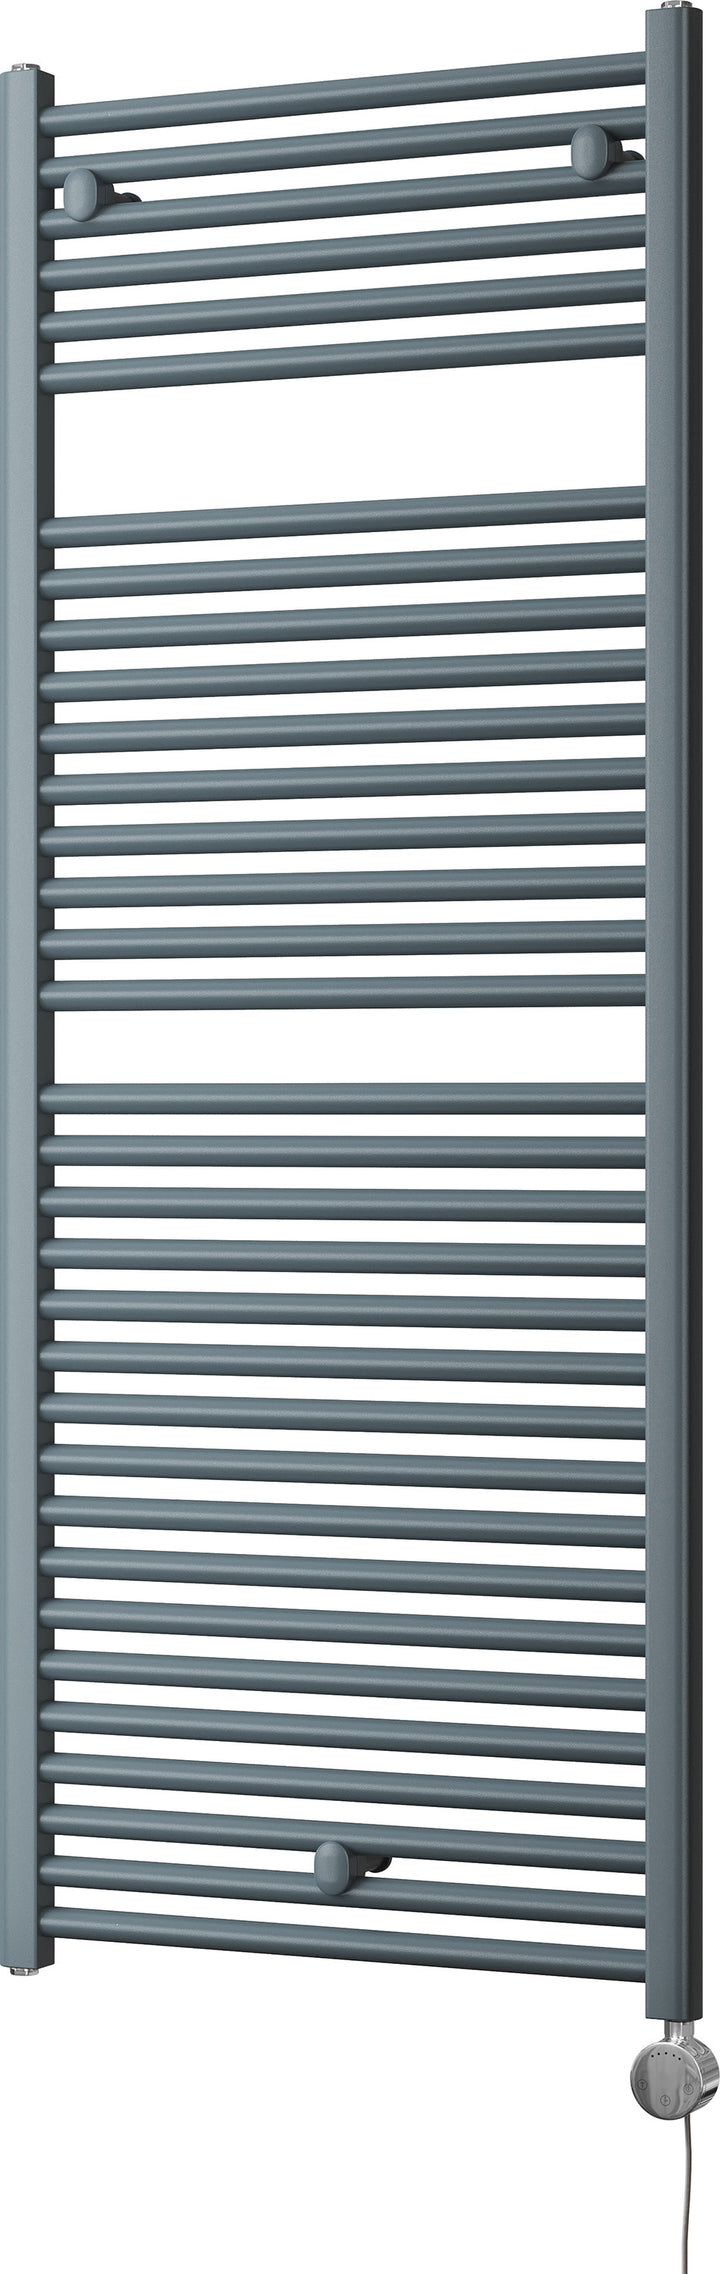 Roma - Anthracite Electric Towel Rail H1512mm x W600mm Straight 1000w Thermostatic